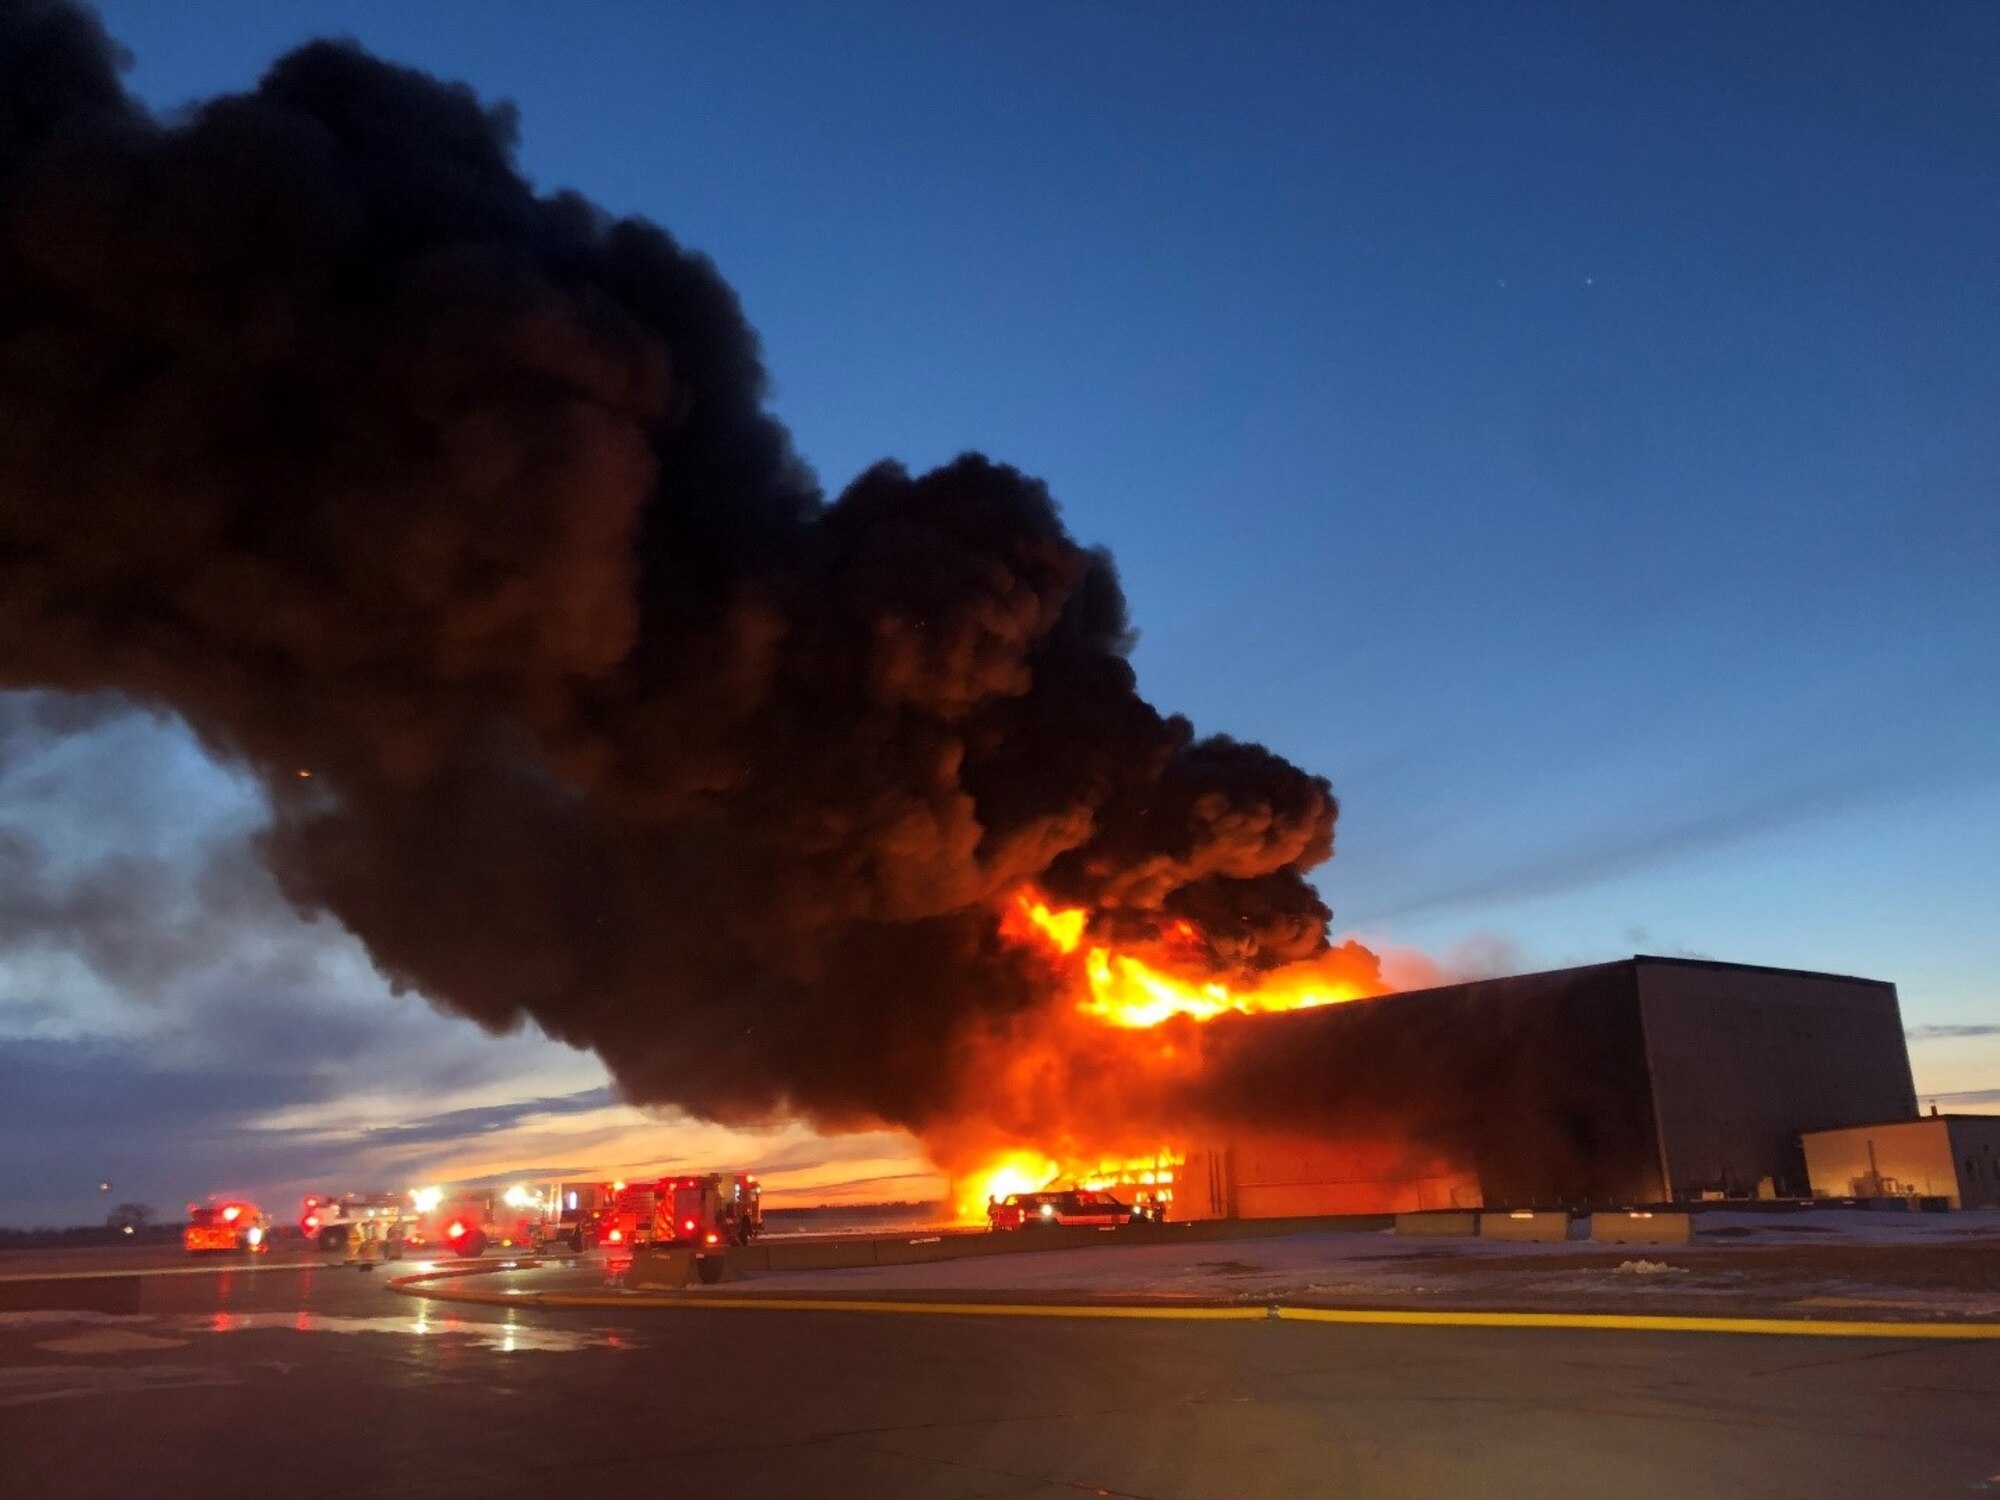 On Dec. 28, 2019, a fire gutted this Strategic Air Command-era hangar on Miniot Air Force Base, N.D. Office of Special Investigations Detachment 813 and 2nd Field Investigations Squadron teamed with the Bureau of Alcohol, Tobacco, Firearms and Explosives to conduct the subsequent investigation to determine the origin and cause of the blaze resulting in a $7M loss to the Air Force. (Photo by 91 SFS)